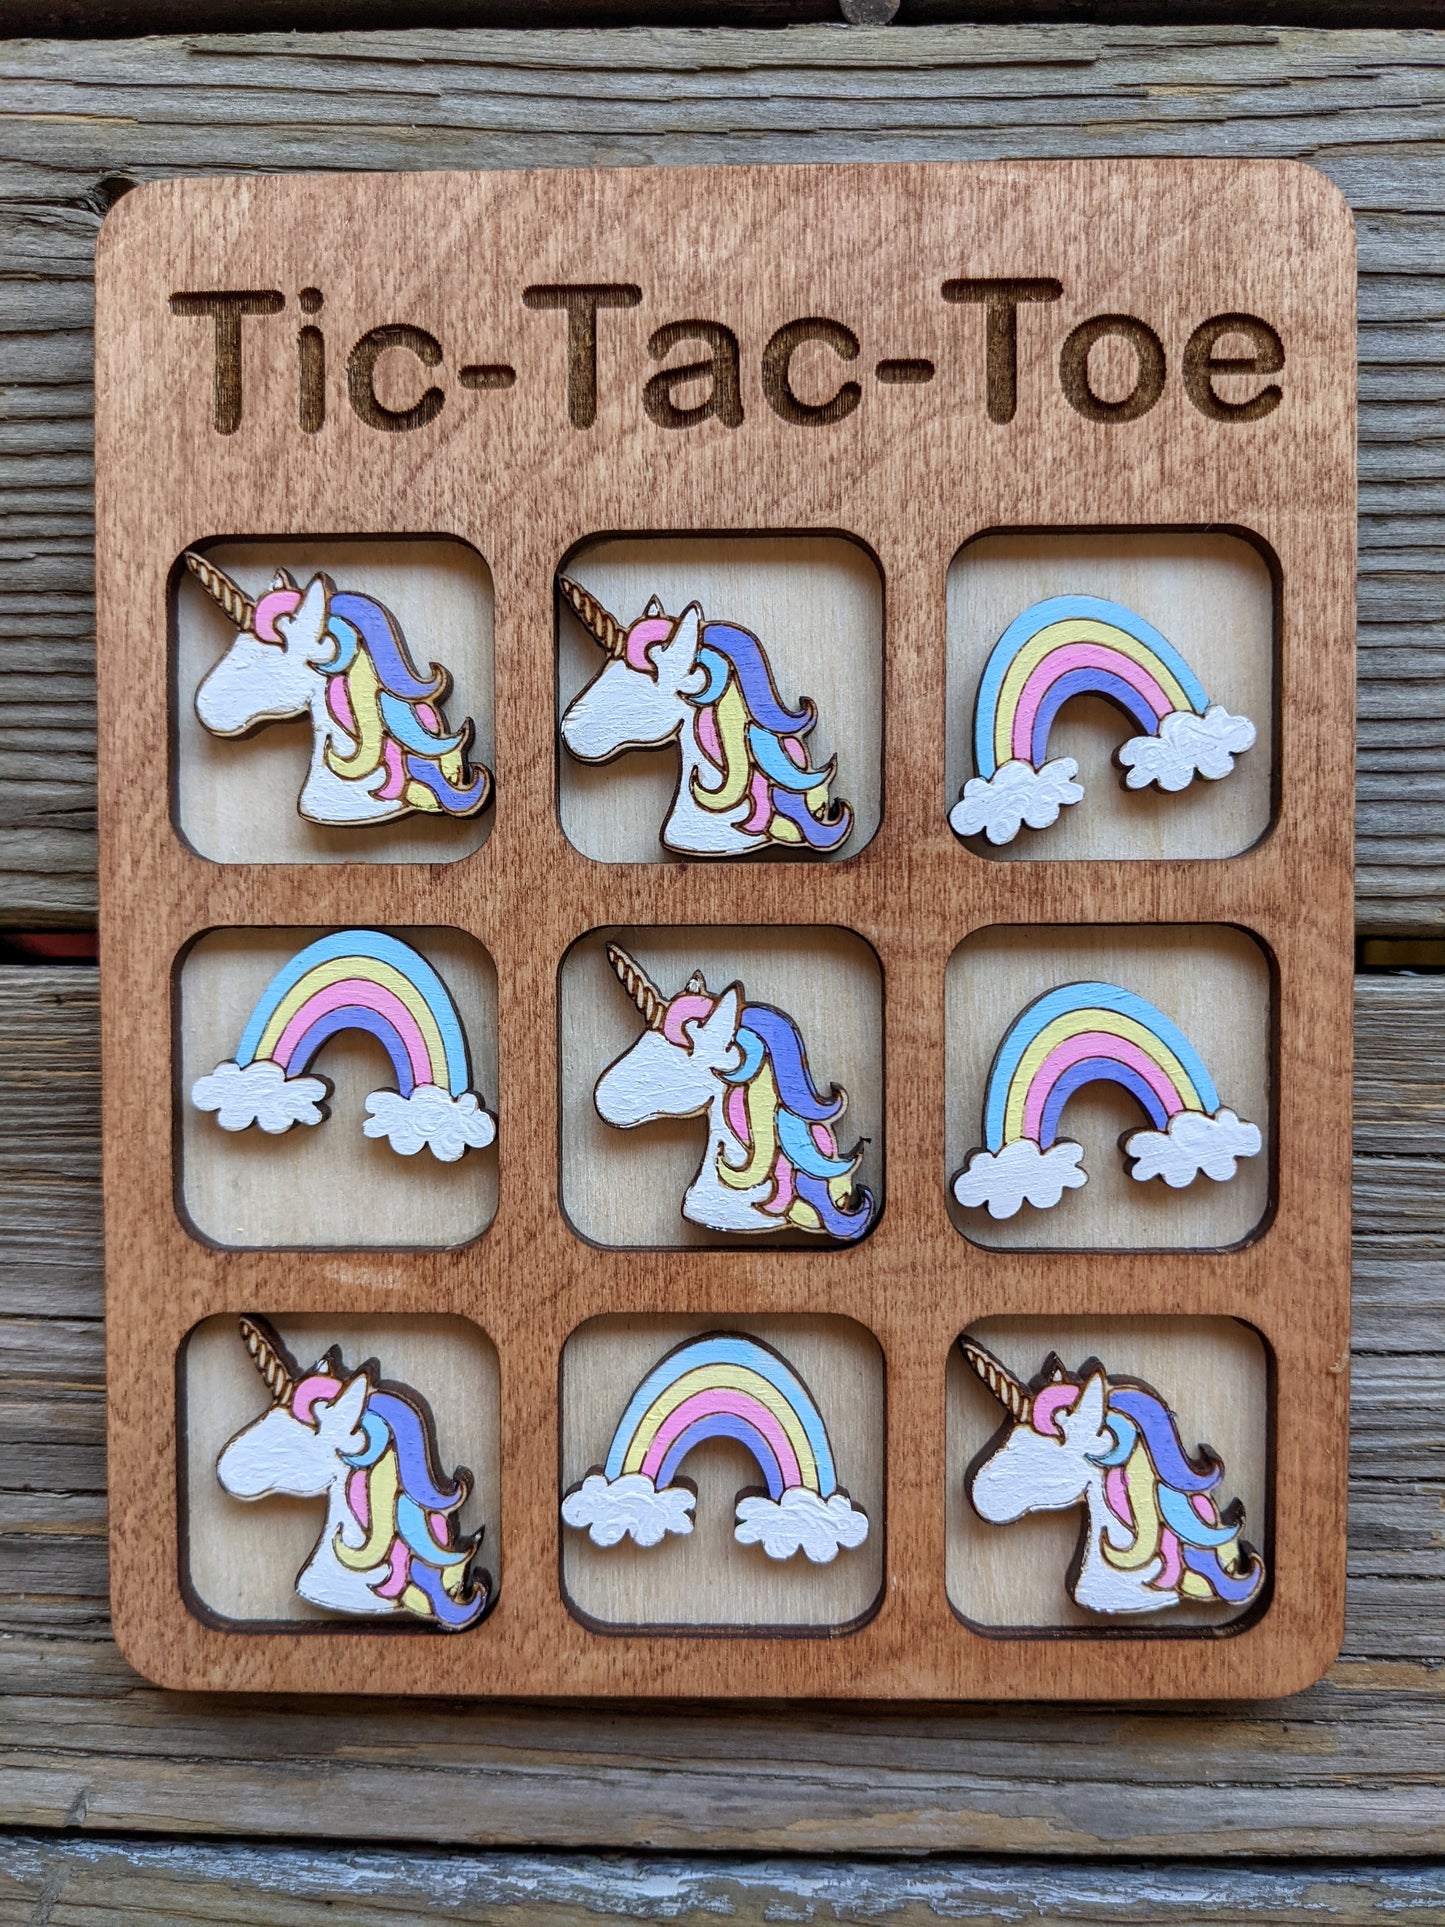 Personalized Tic Tac Toe Game game board 15.00